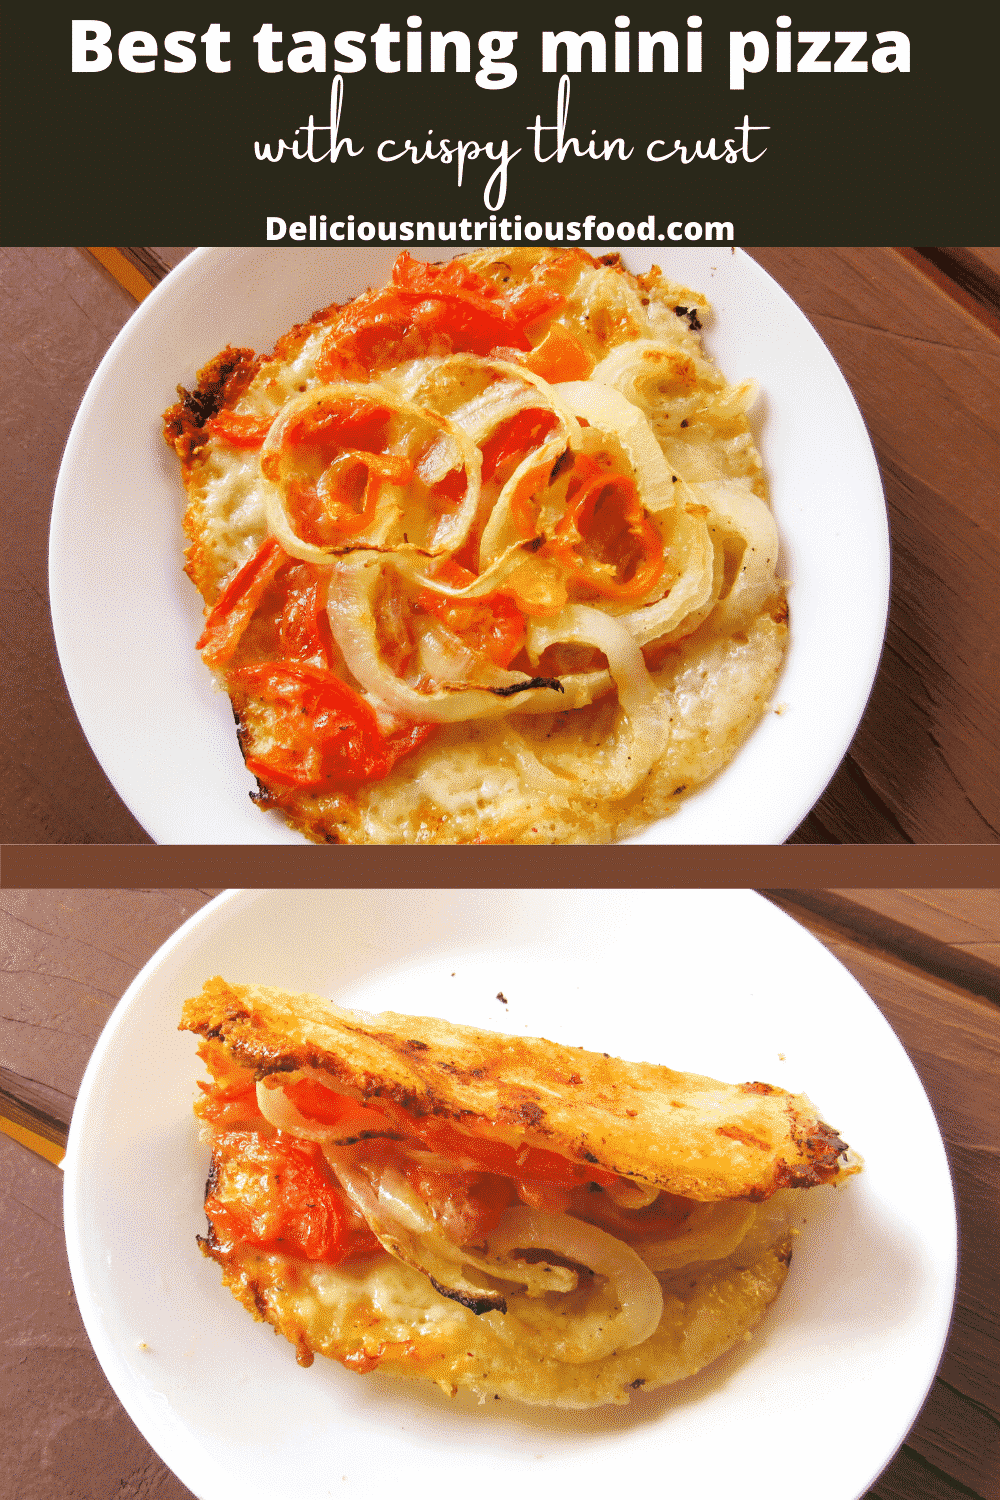 sourdough bread pizza is served on a white plate.